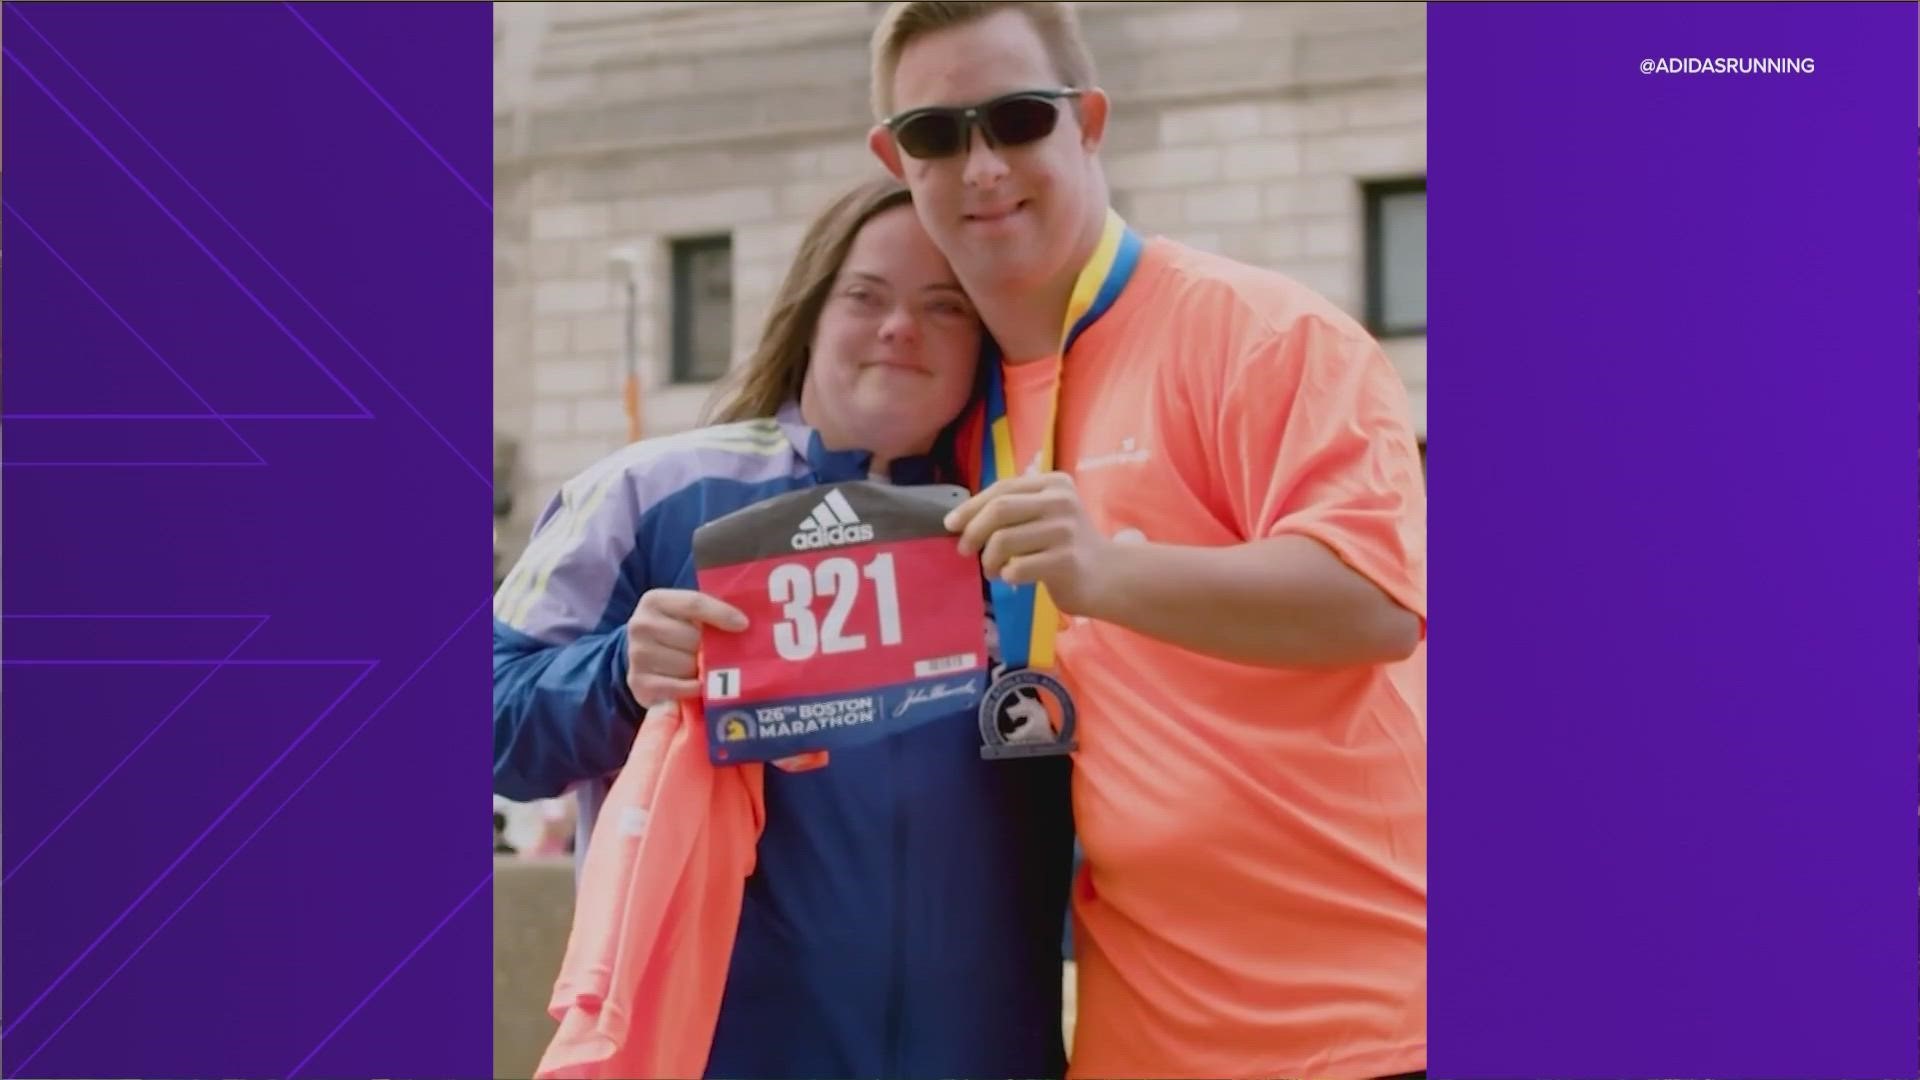 In 2022, Kayleigh Williamson became the first runner with Down syndrome to complete the Austin Marathon. She'll be back on the course on Sunday.